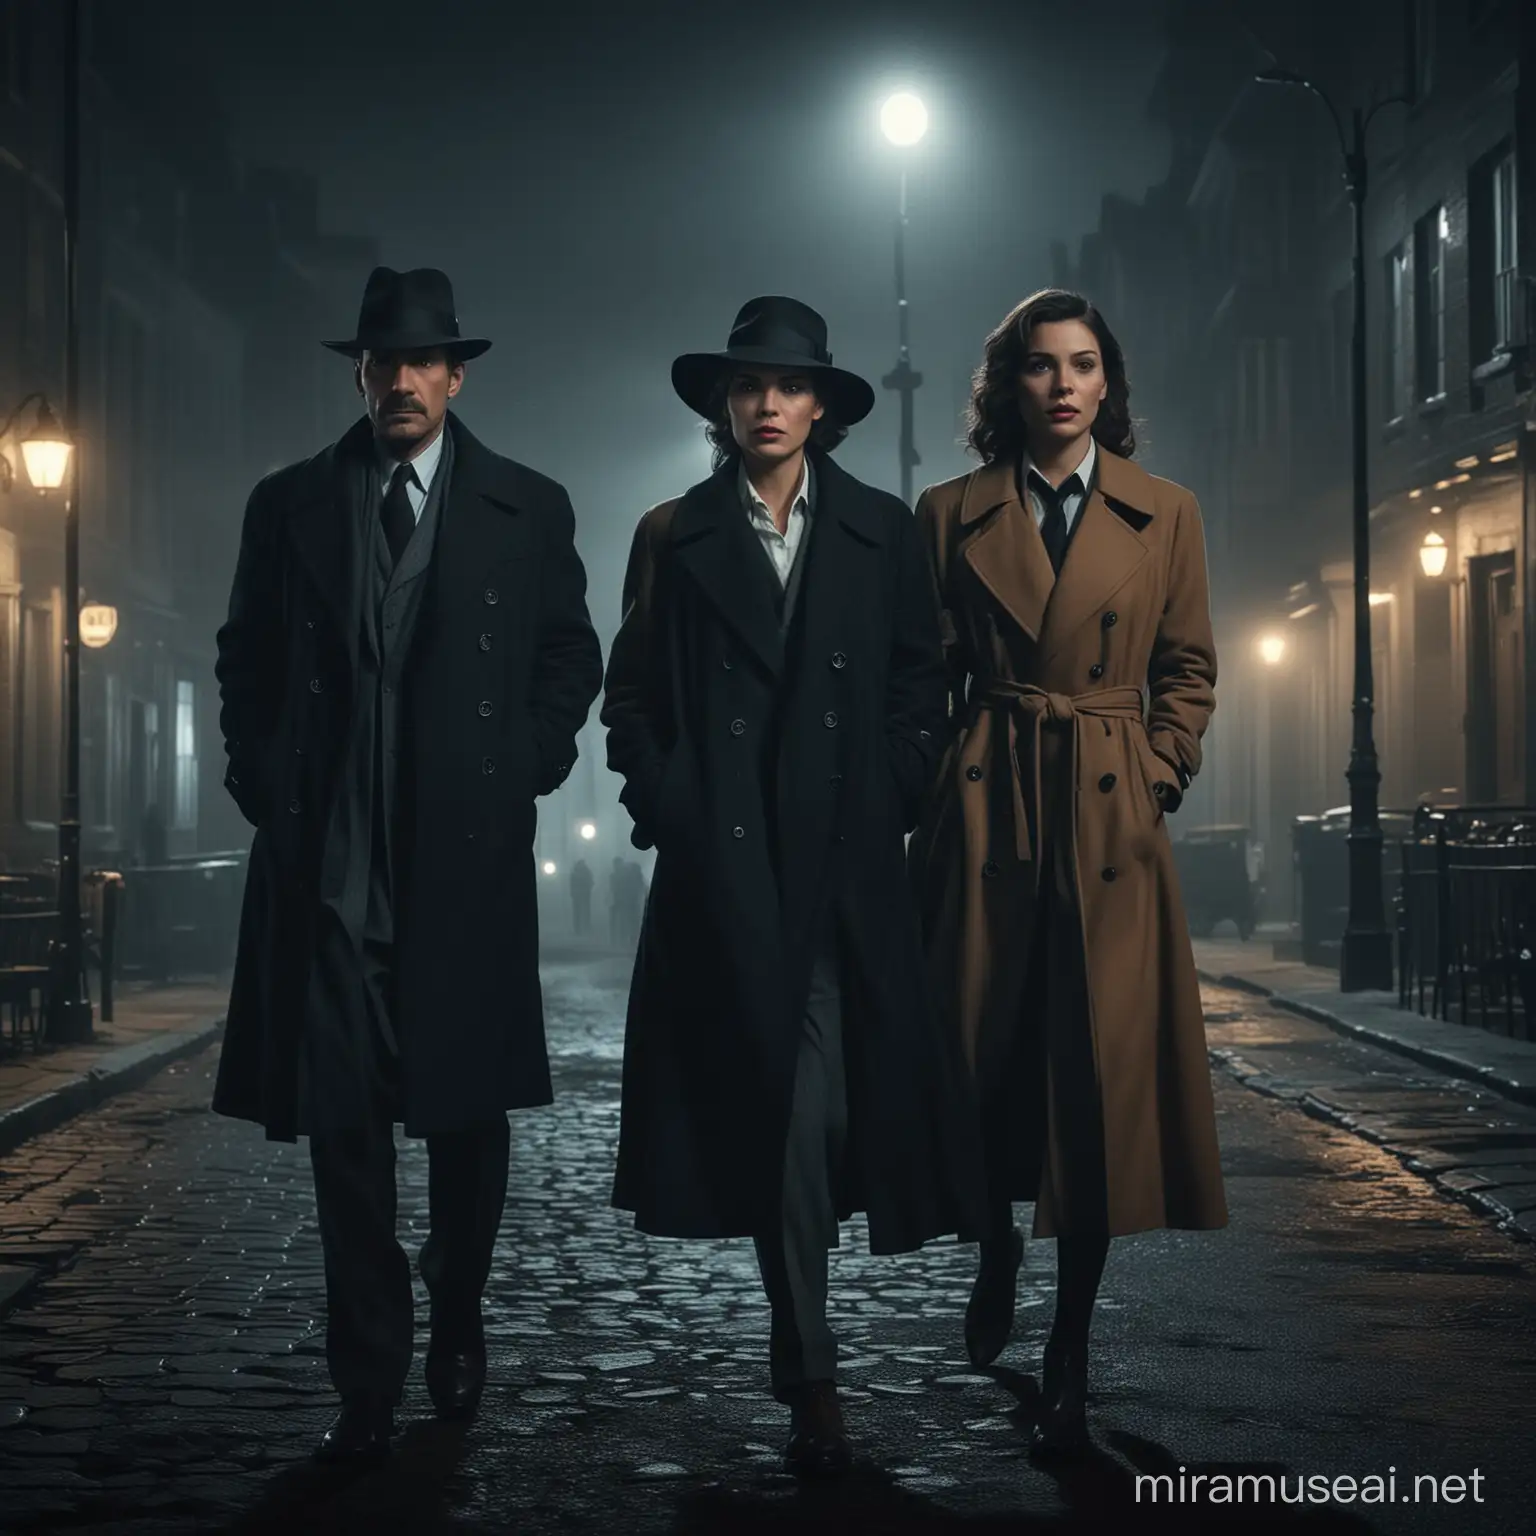 two old-fashioned detectives, one man and one woman at night, but with no weapons